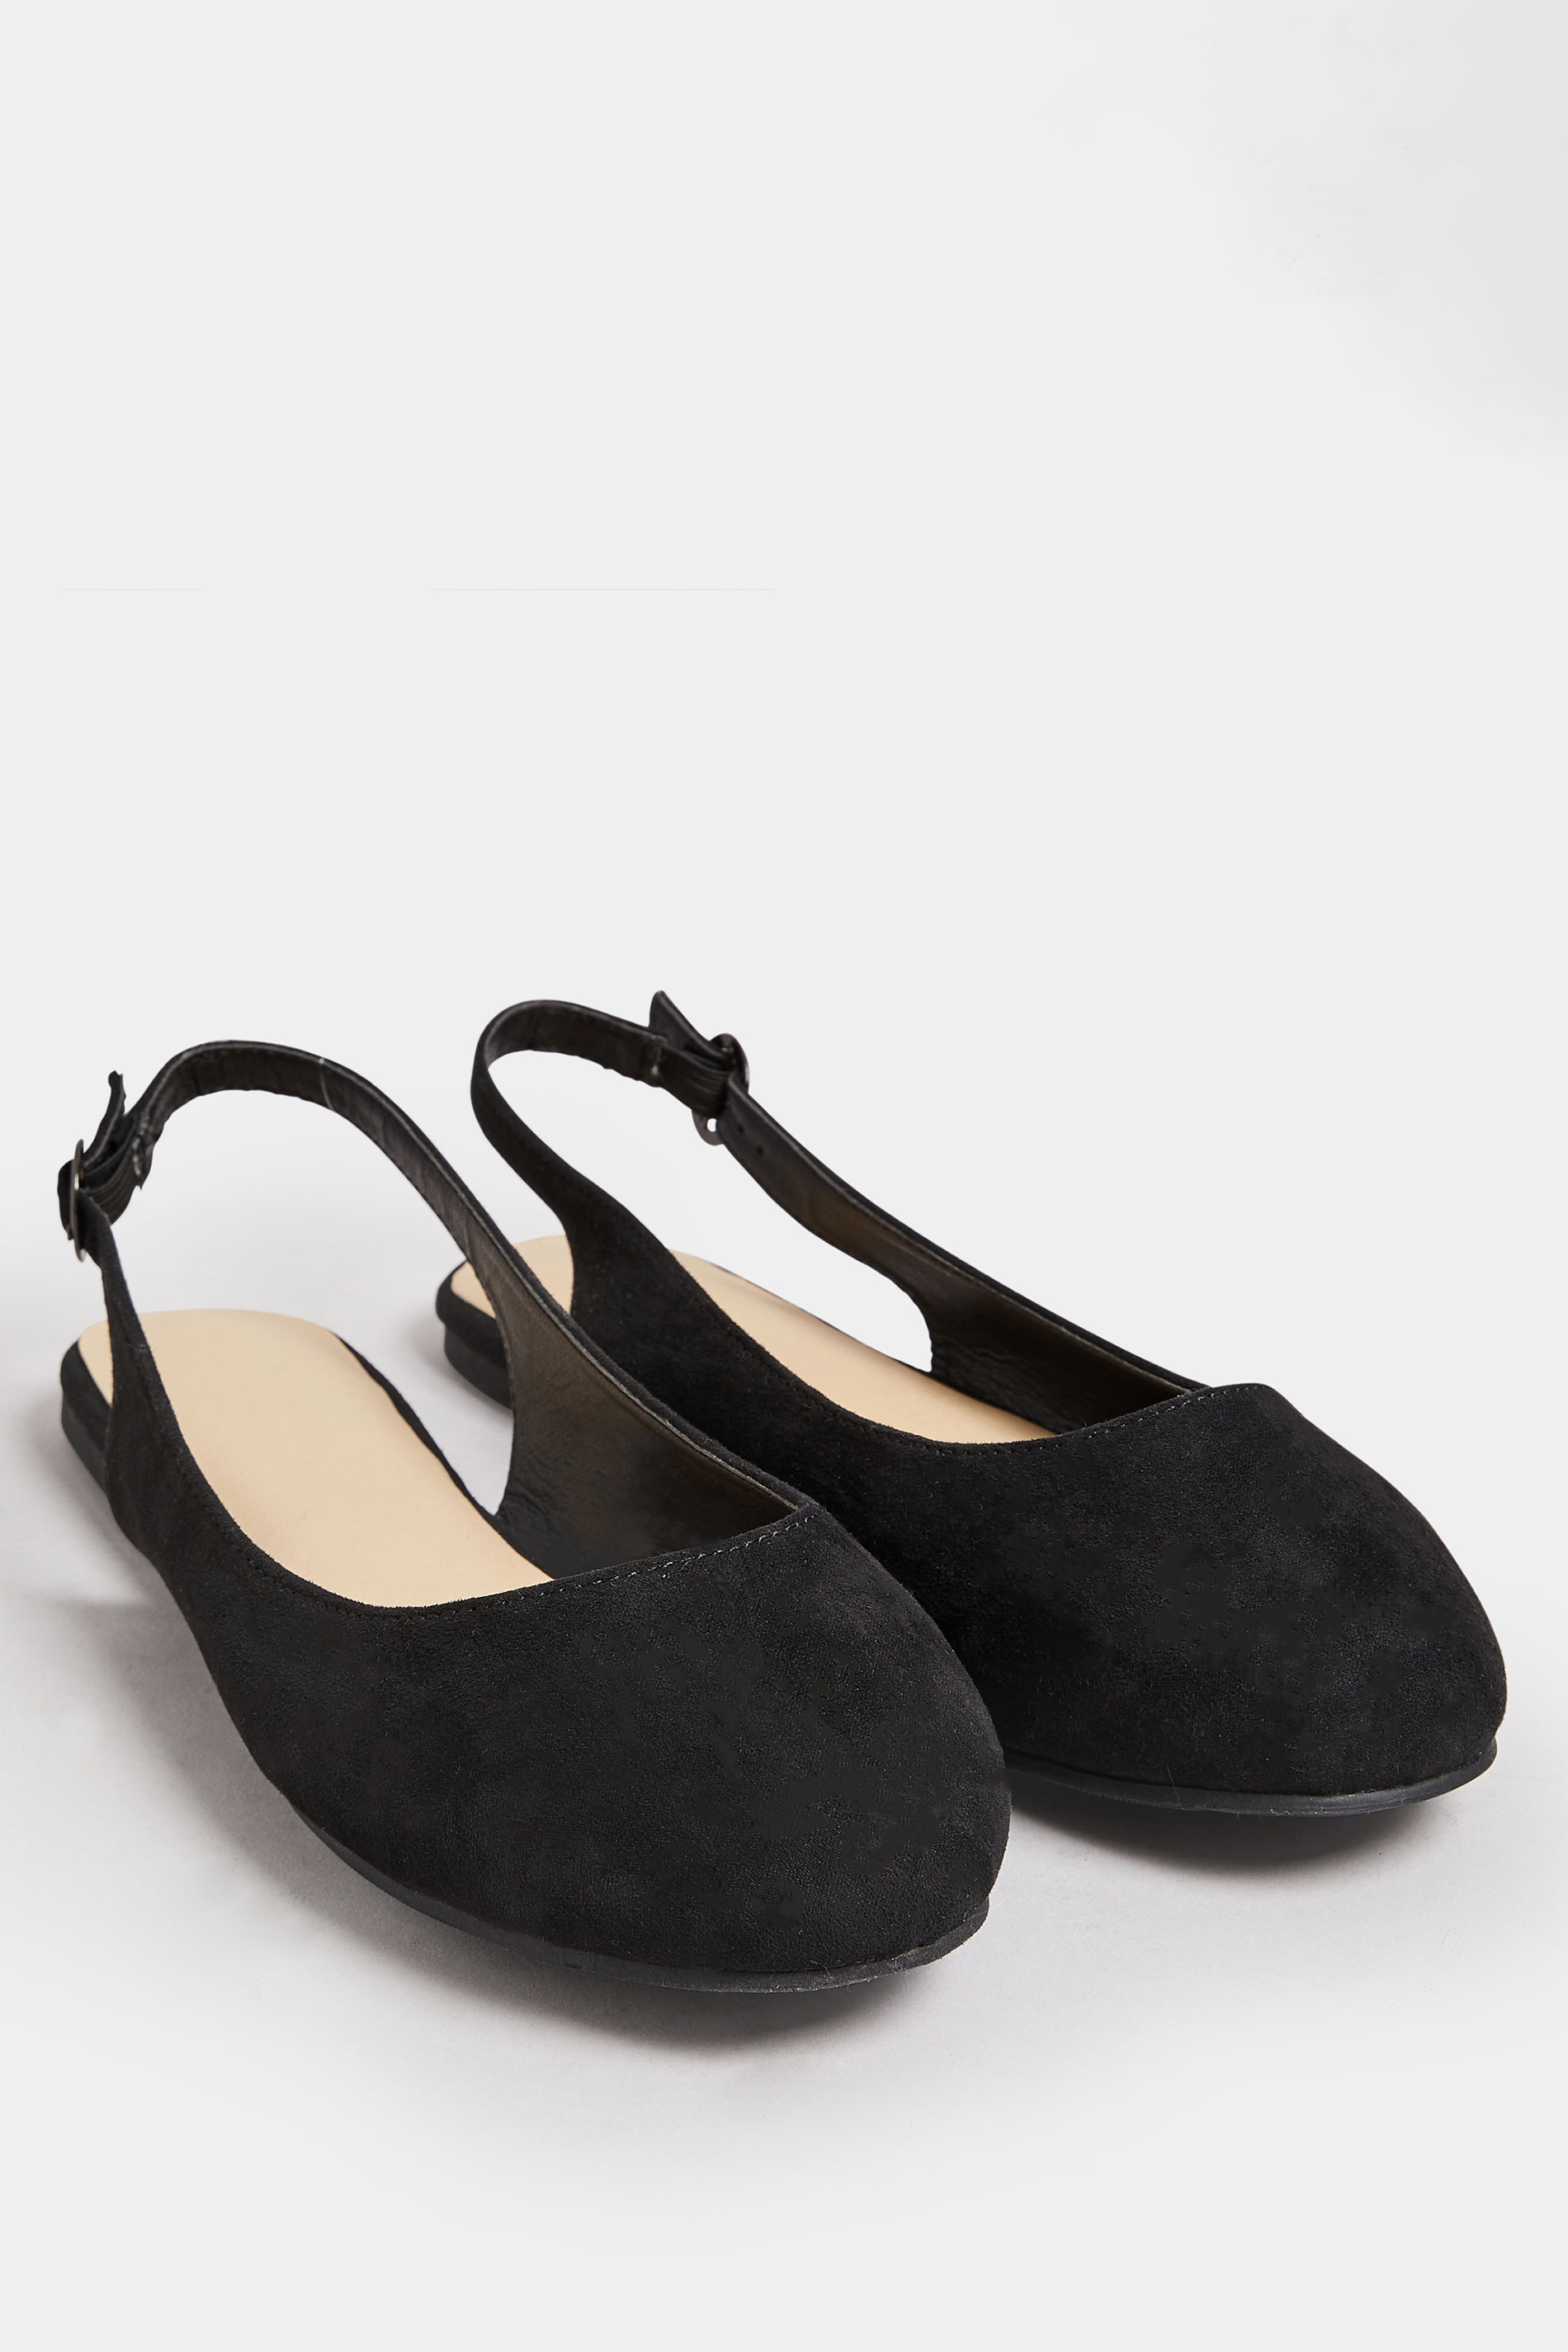 Black Faux Suede Slingback Pumps In Extra Wide EEE Fit | Yours Clothing 2